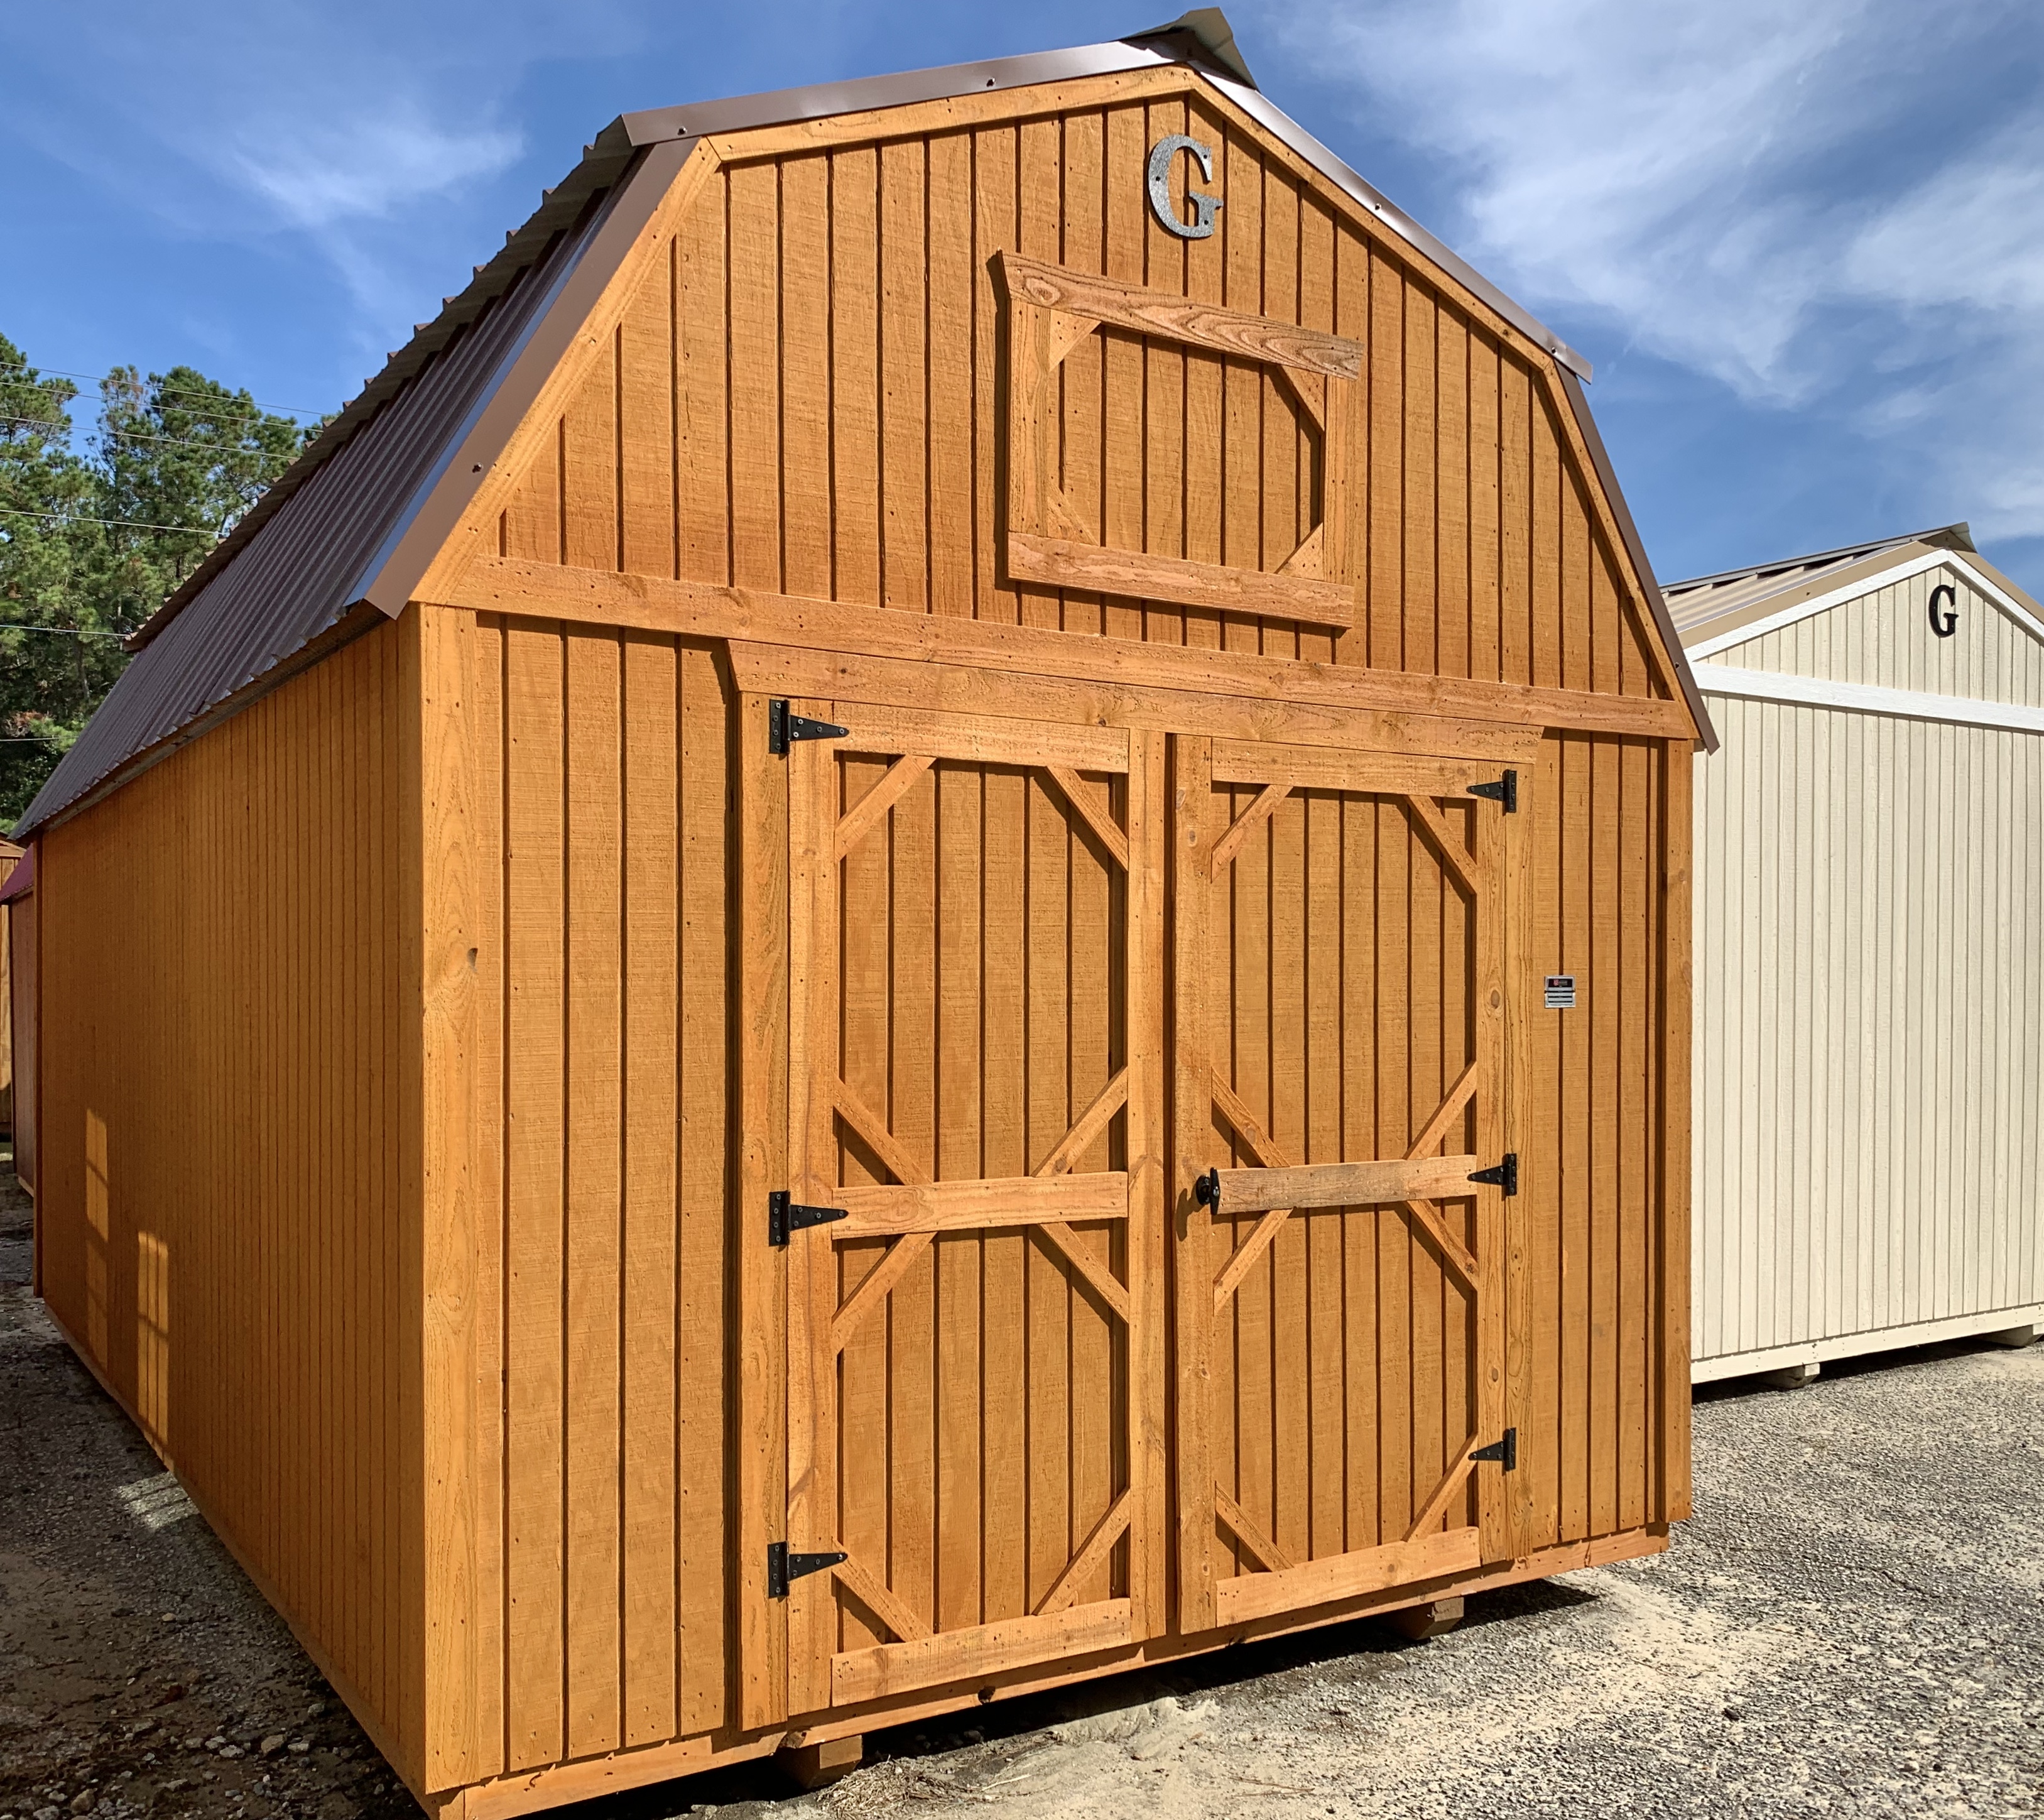 Shed With Garage Door for Sale | 10x20 Lofted Barn ...